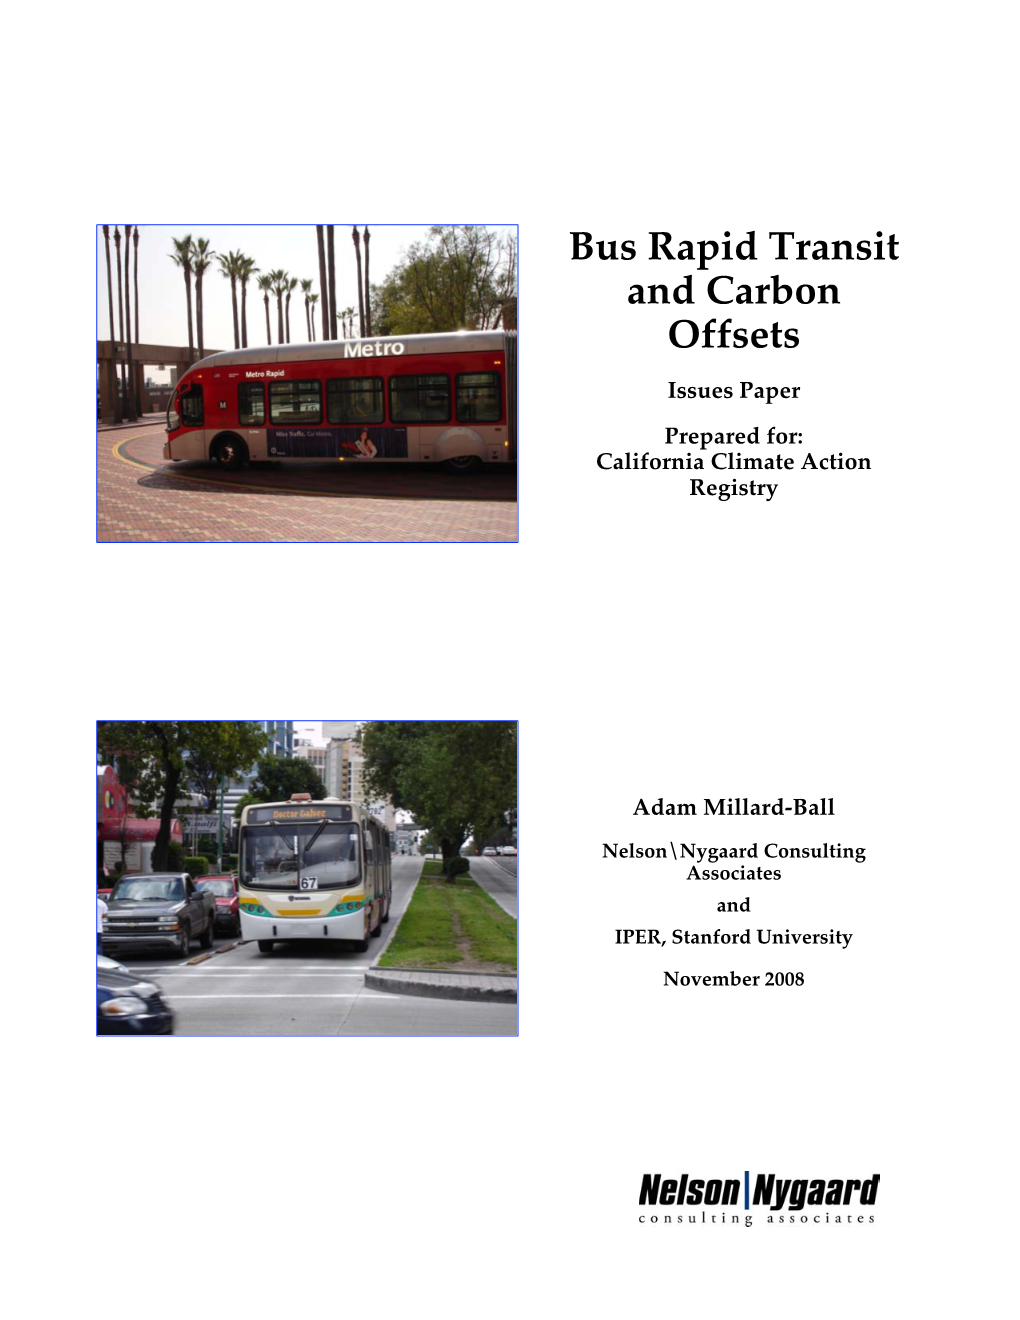 Bus Rapid Transit and Carbon Offsets FINAL